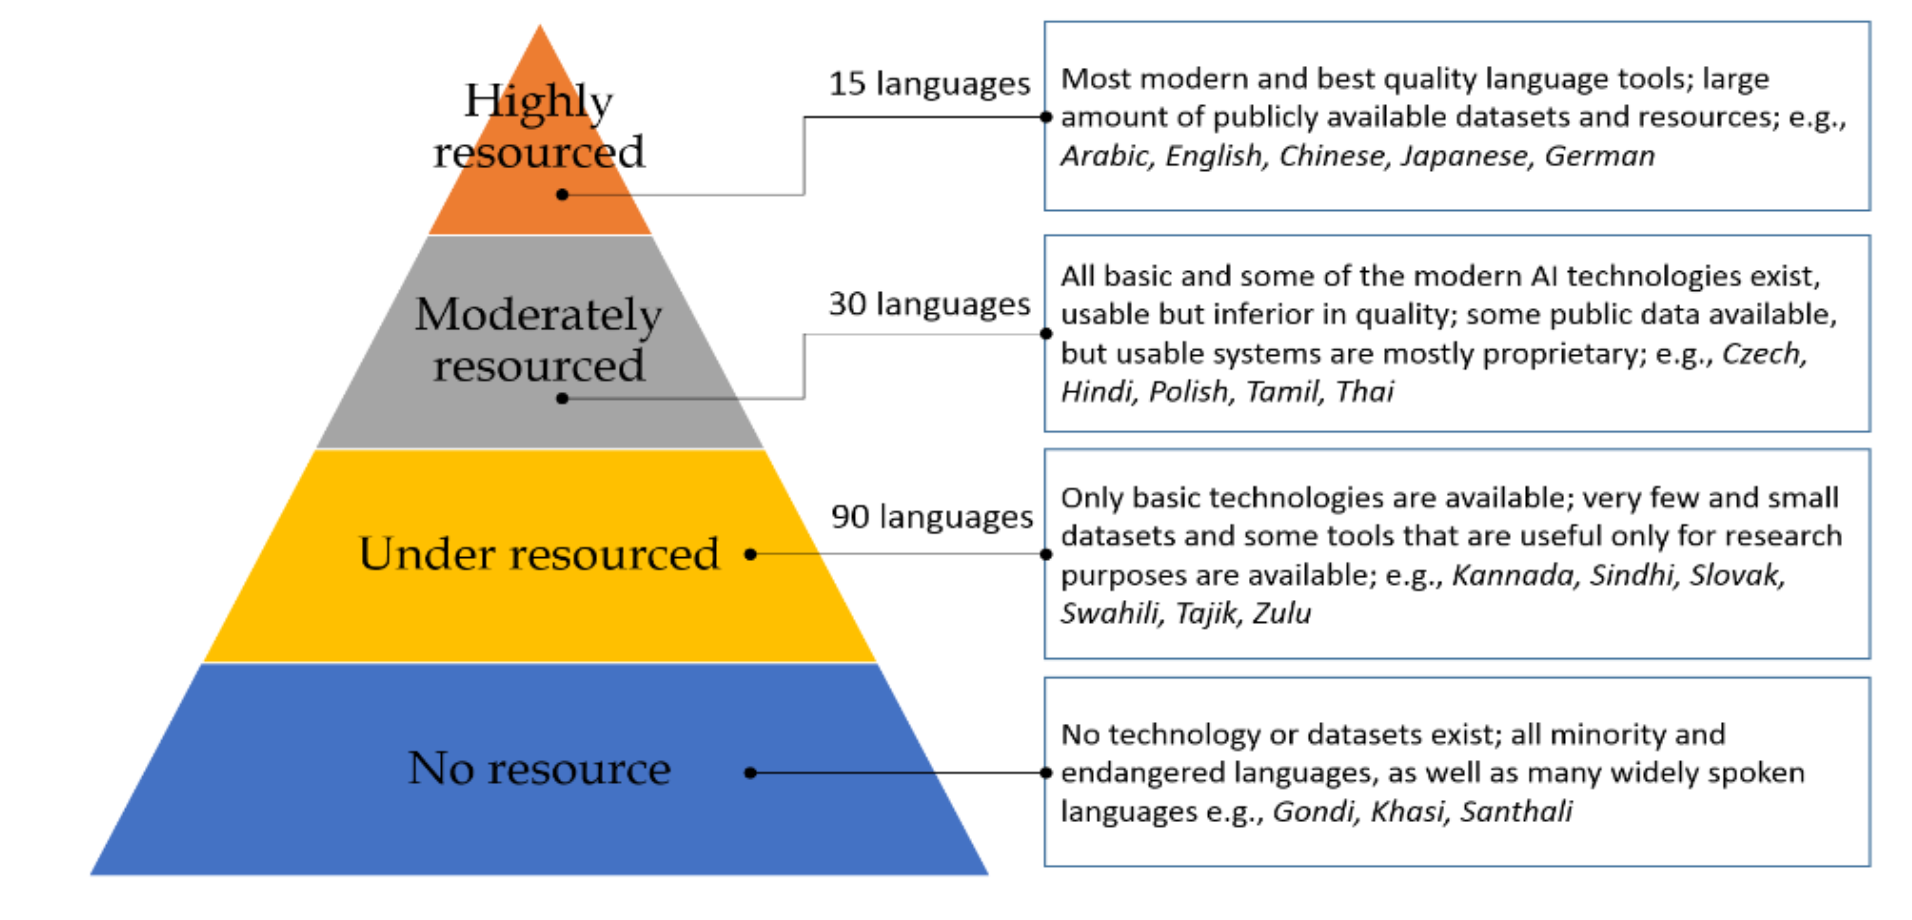 Classification of languages according to the availability of language technology, tools and resources